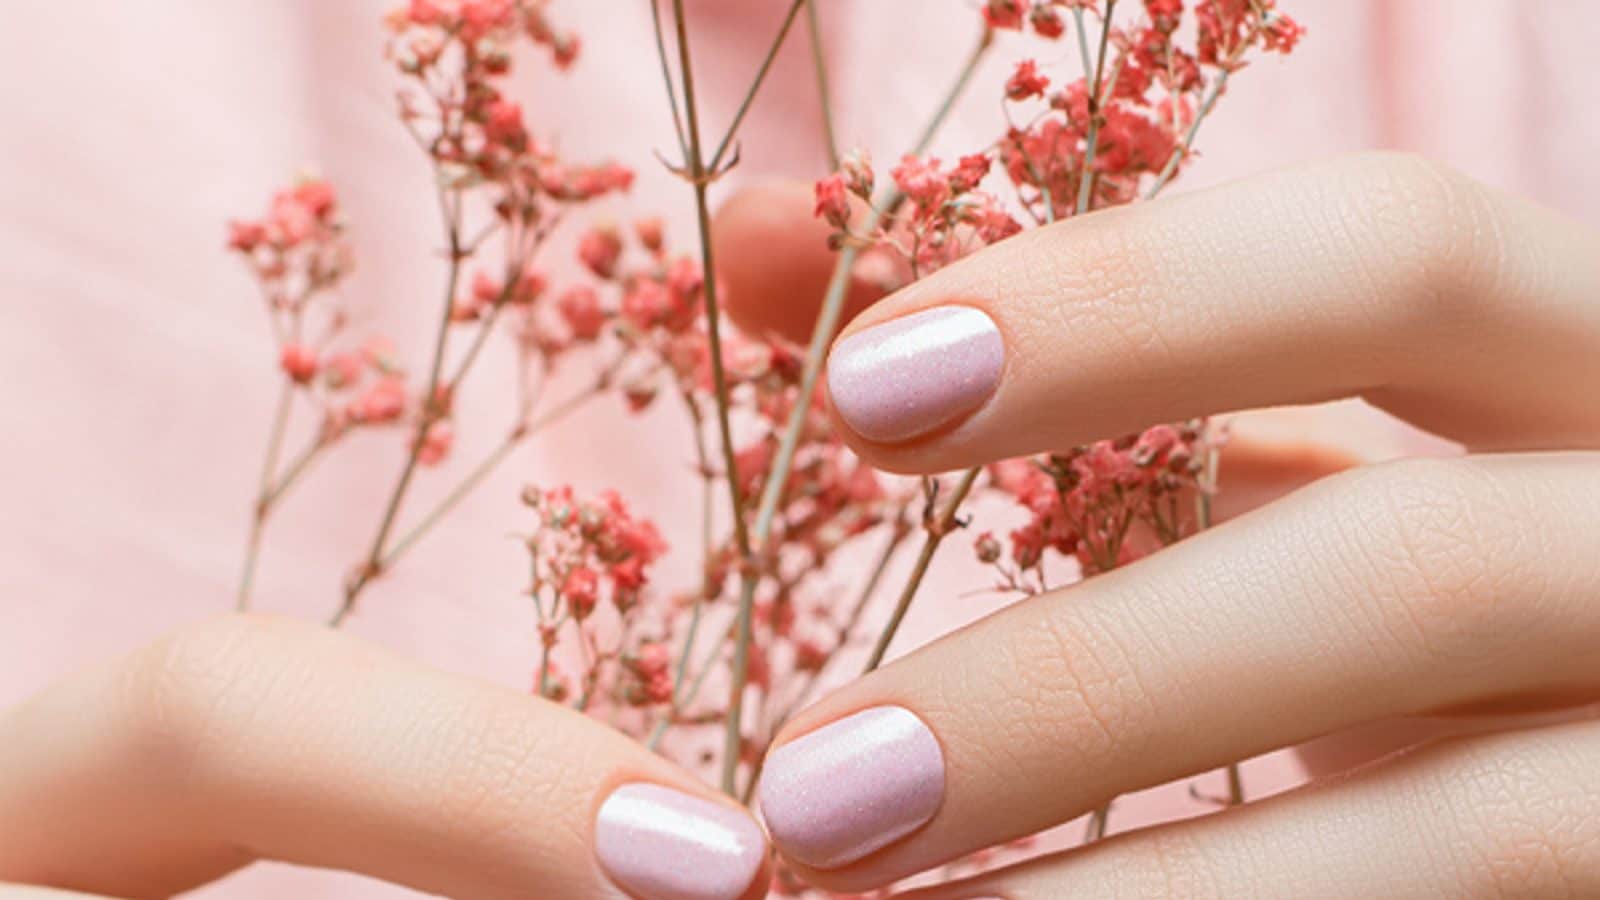 15 Ways to Strengthen Brittle Nails According to Dermatologists